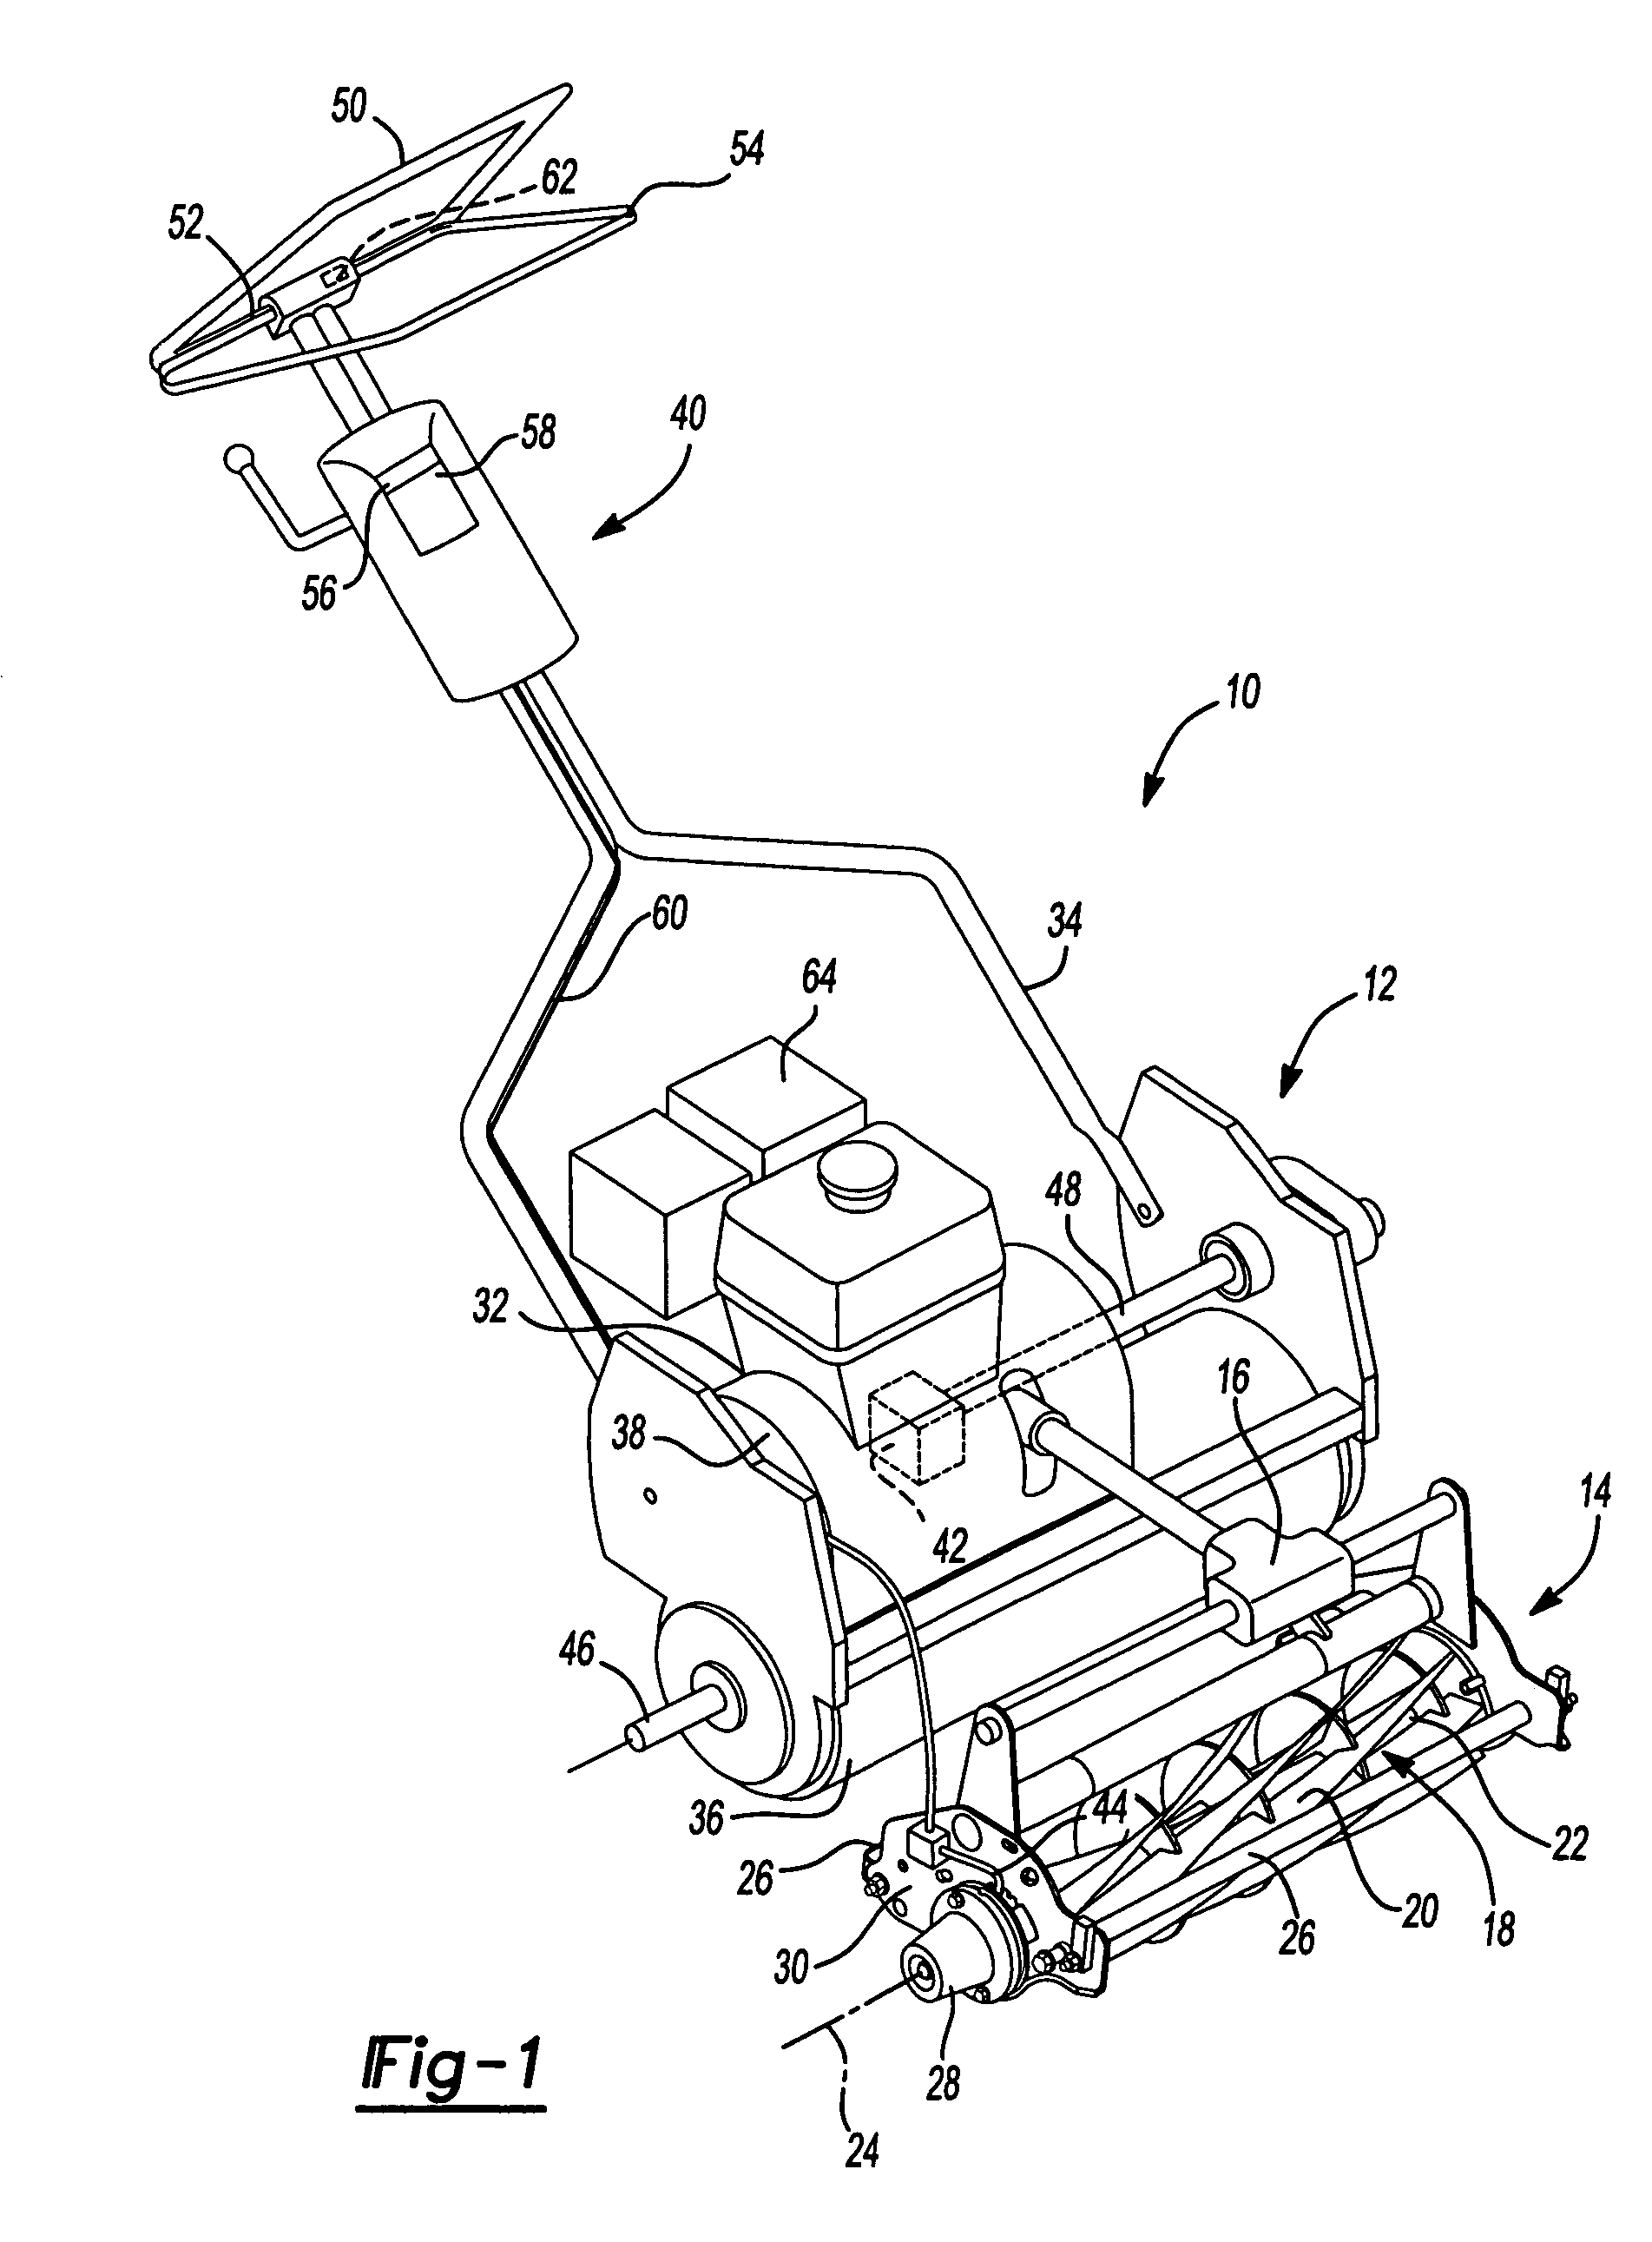 Internal combustion engine traction drive with electric cutting unit drive for walking greens mower